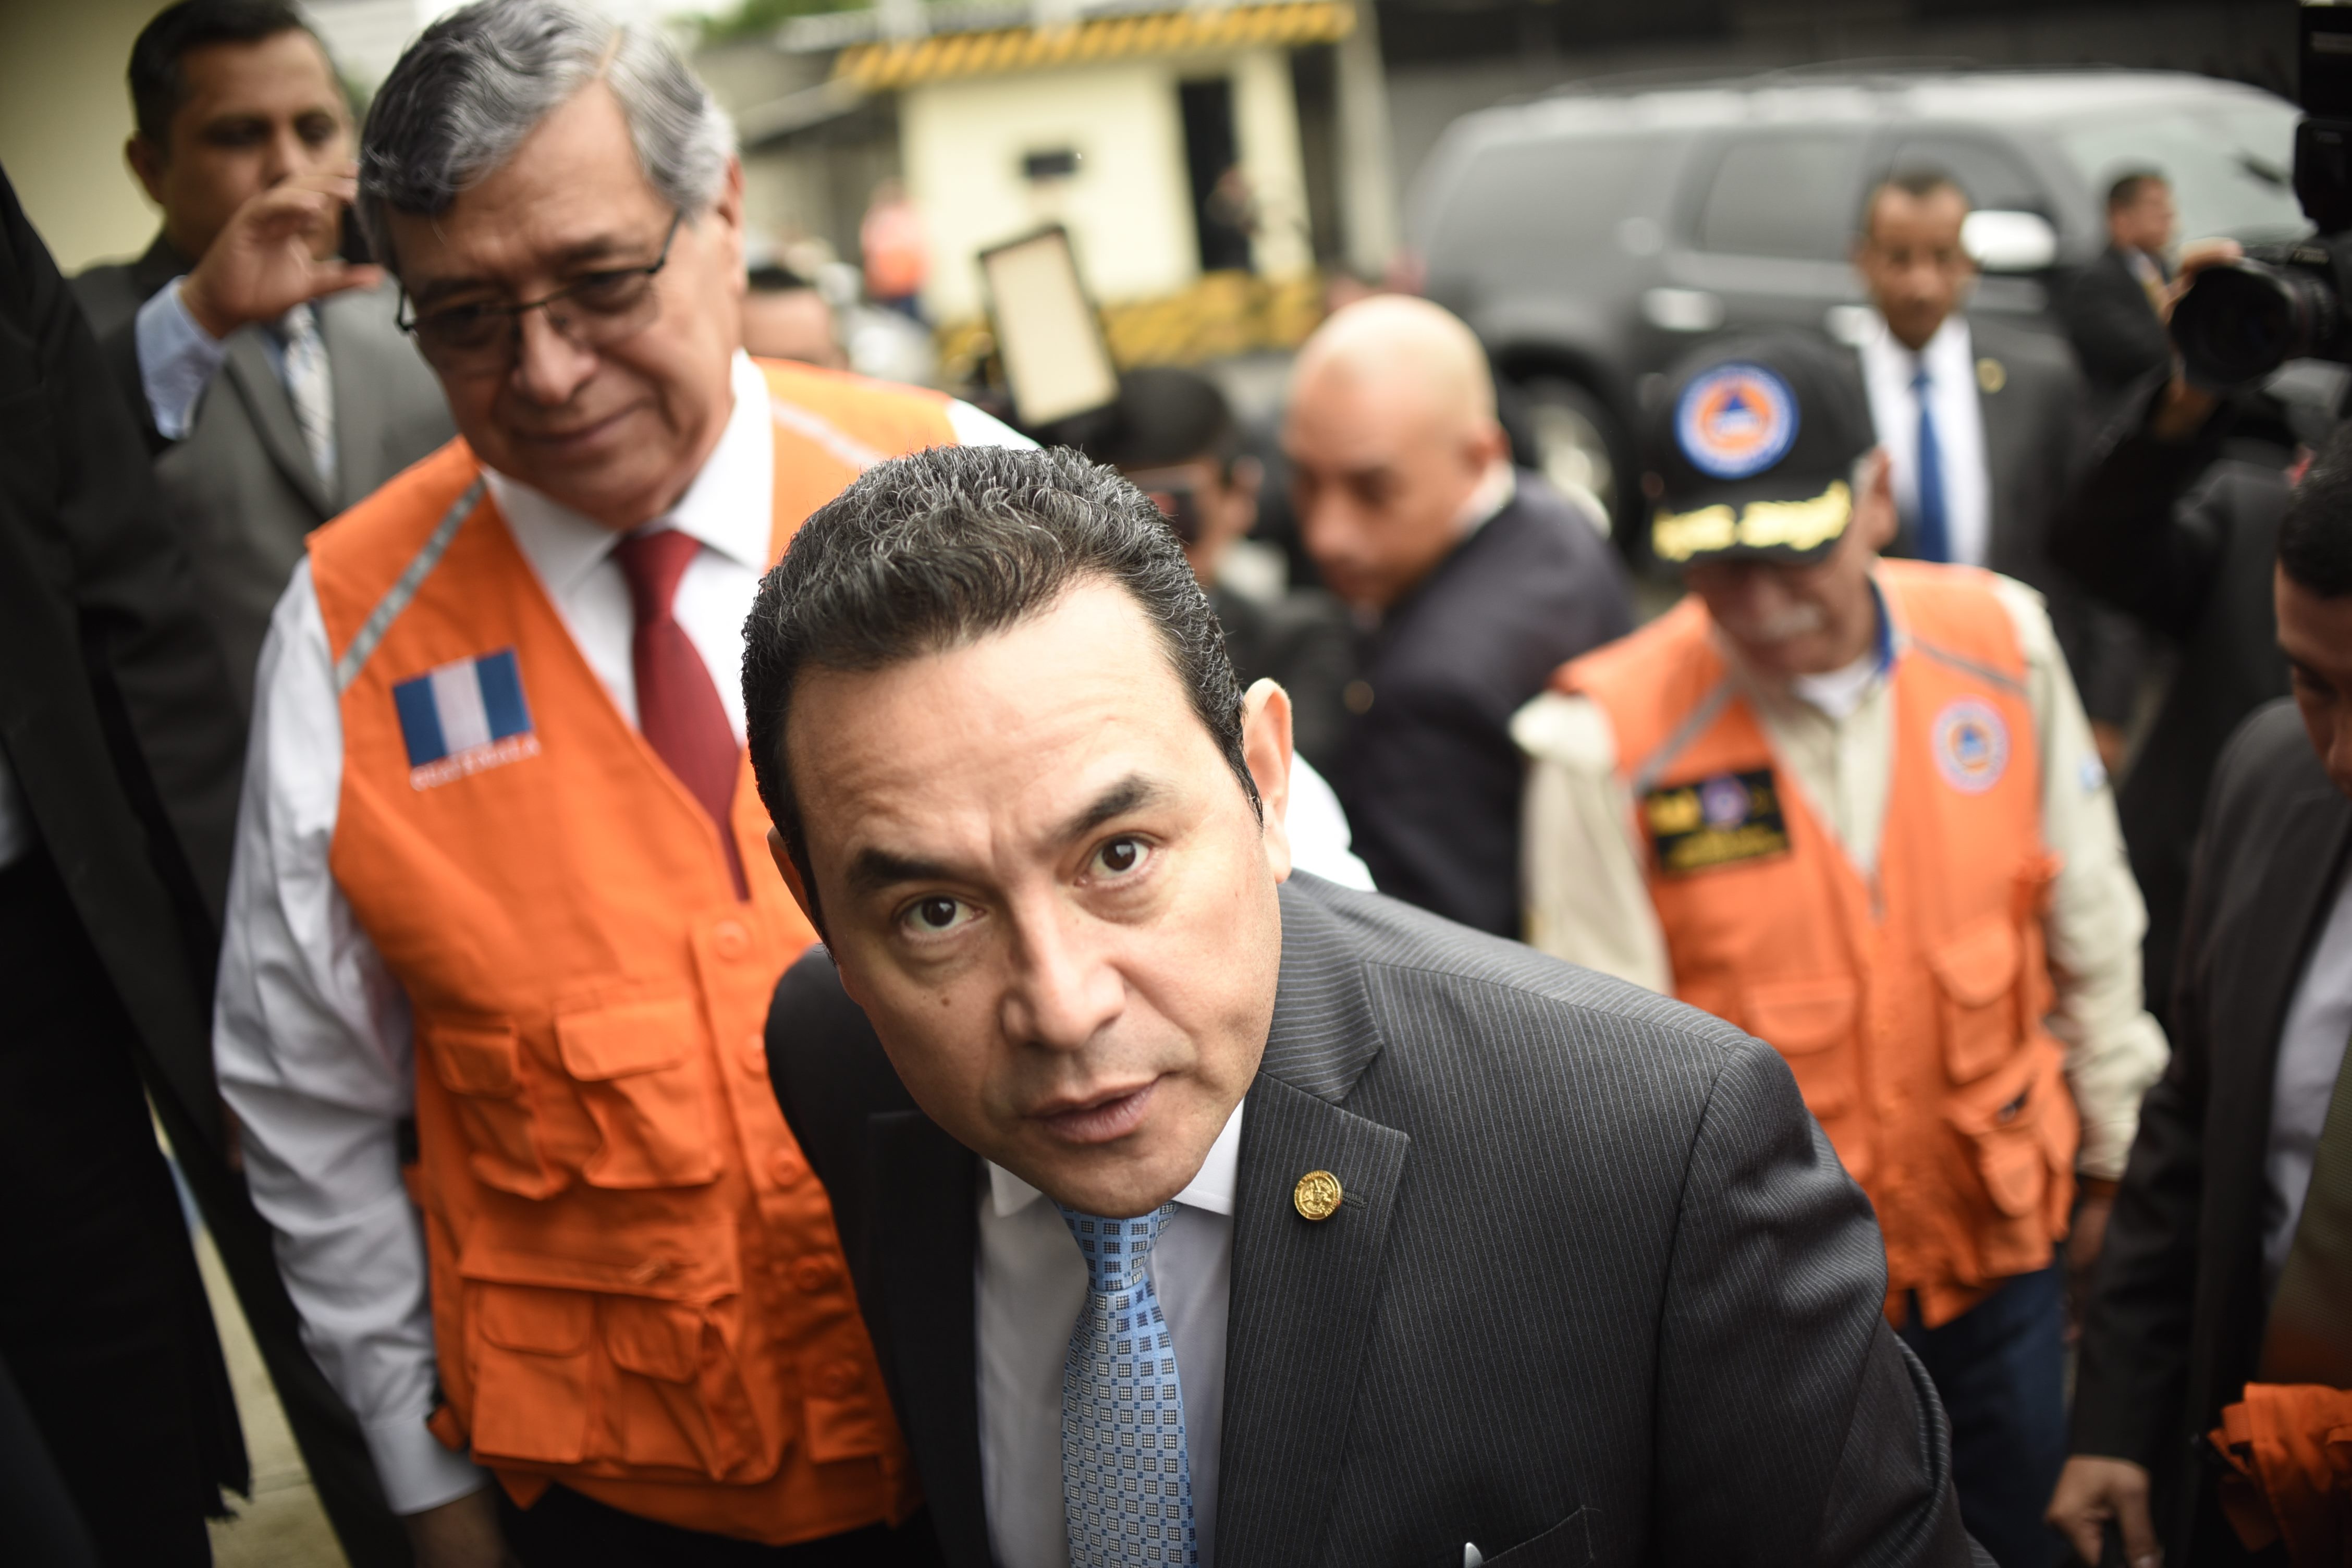 Guatemalan President Jimmy Morales is in hot water